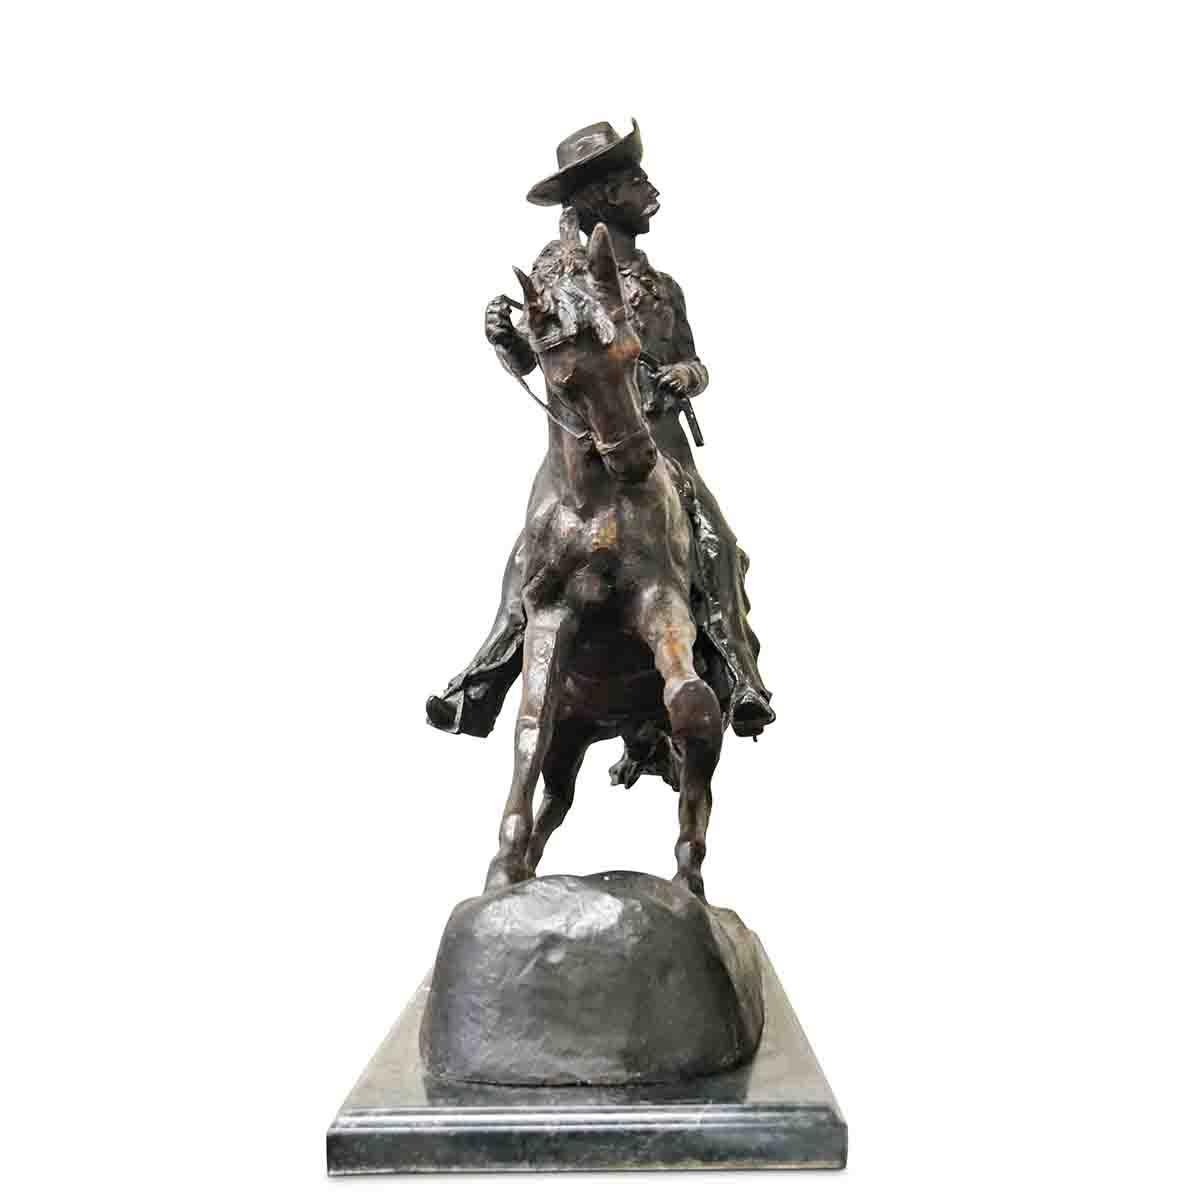 Cowboy, a cast bronze sculpture after American artist Frederic Remington's original, on marble base. Filled with a great dramatic tension, this bronze sculpture depicts a scene from the American Old West particularly dear to Frederic Remington.